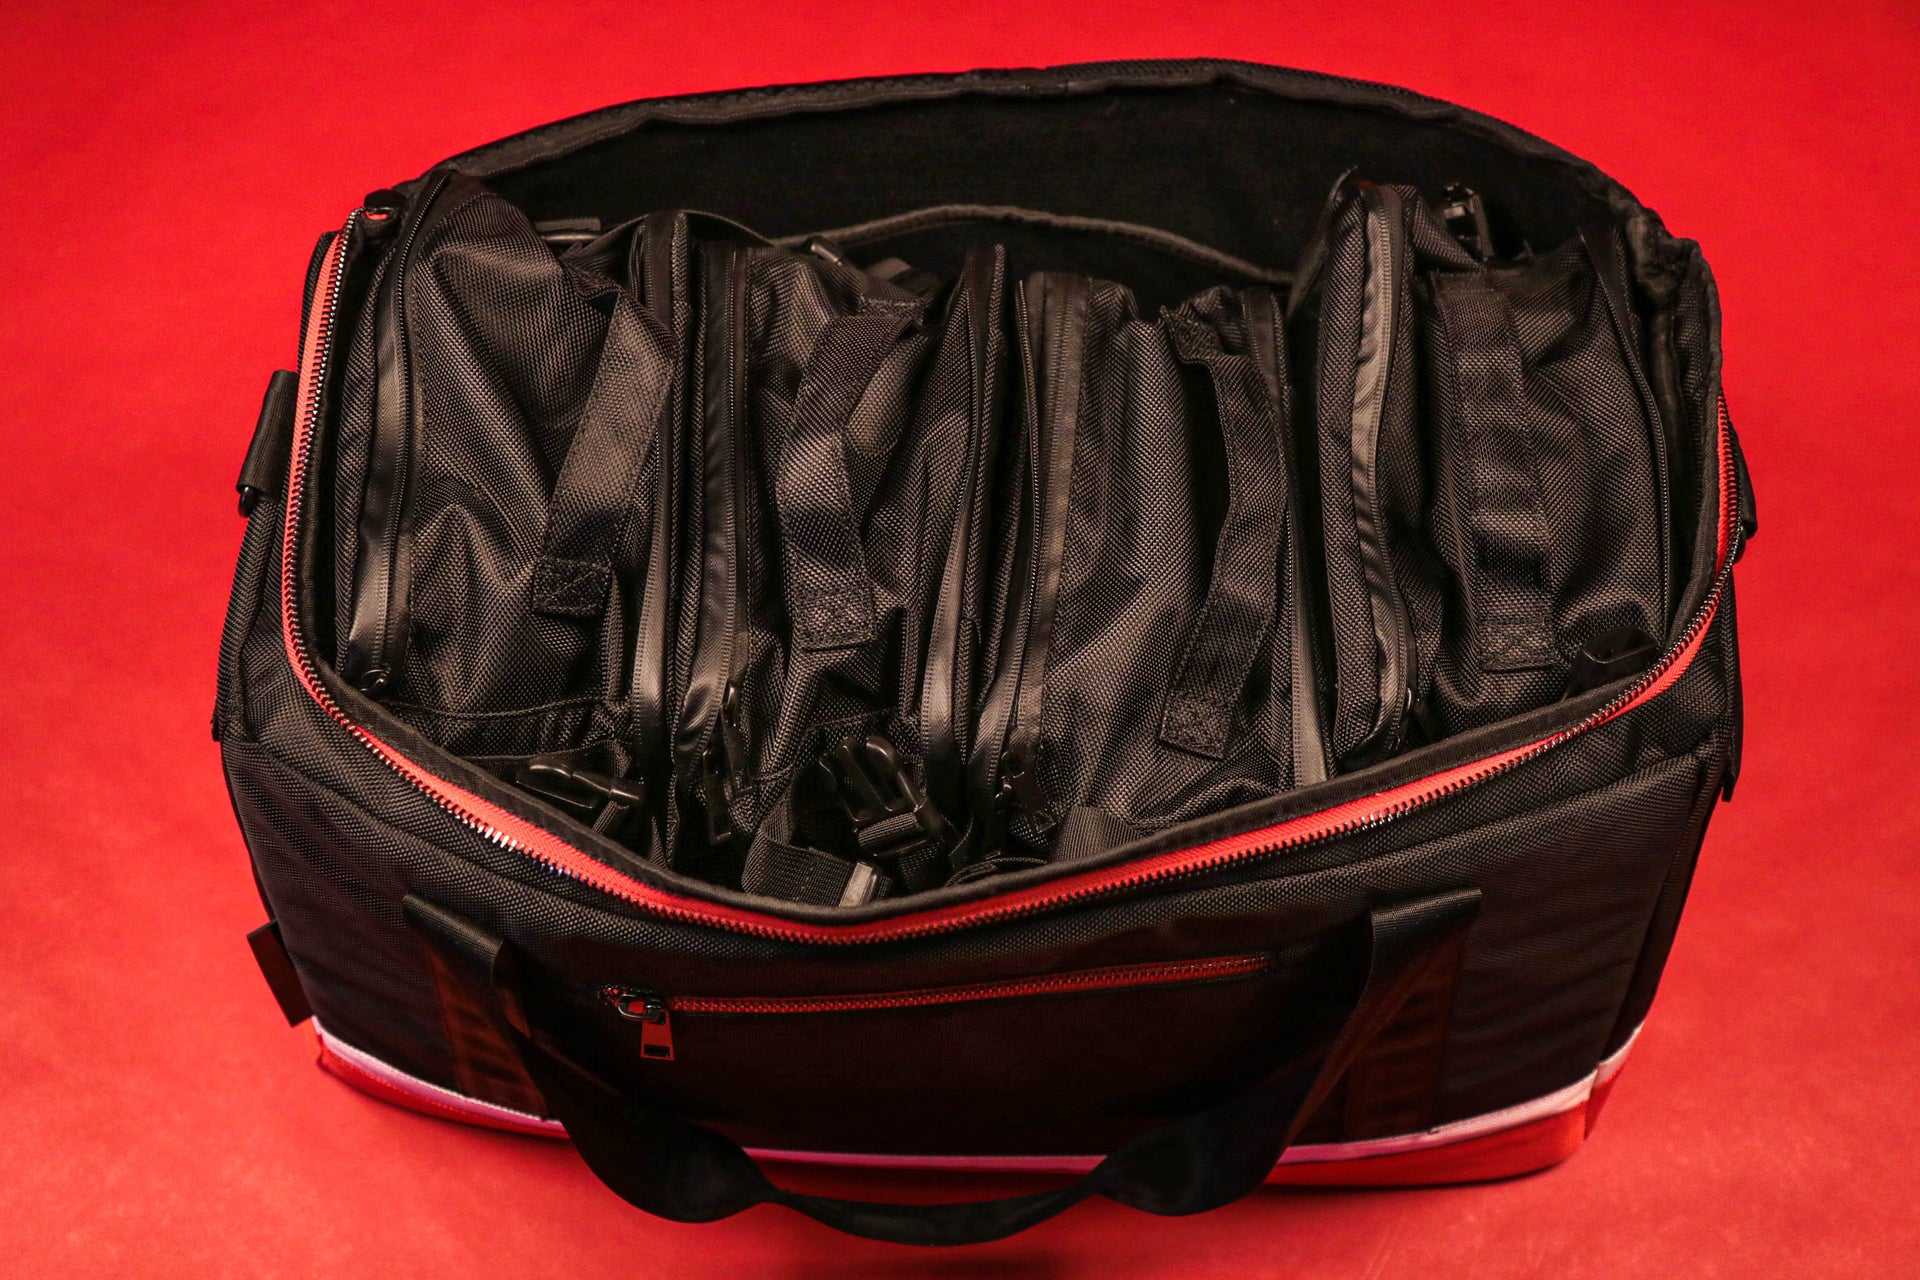 The inside of the Flight Pack Sneaker Duffle Bag To Match Bred 11s | Sneaker Duffel Travel Bag filled